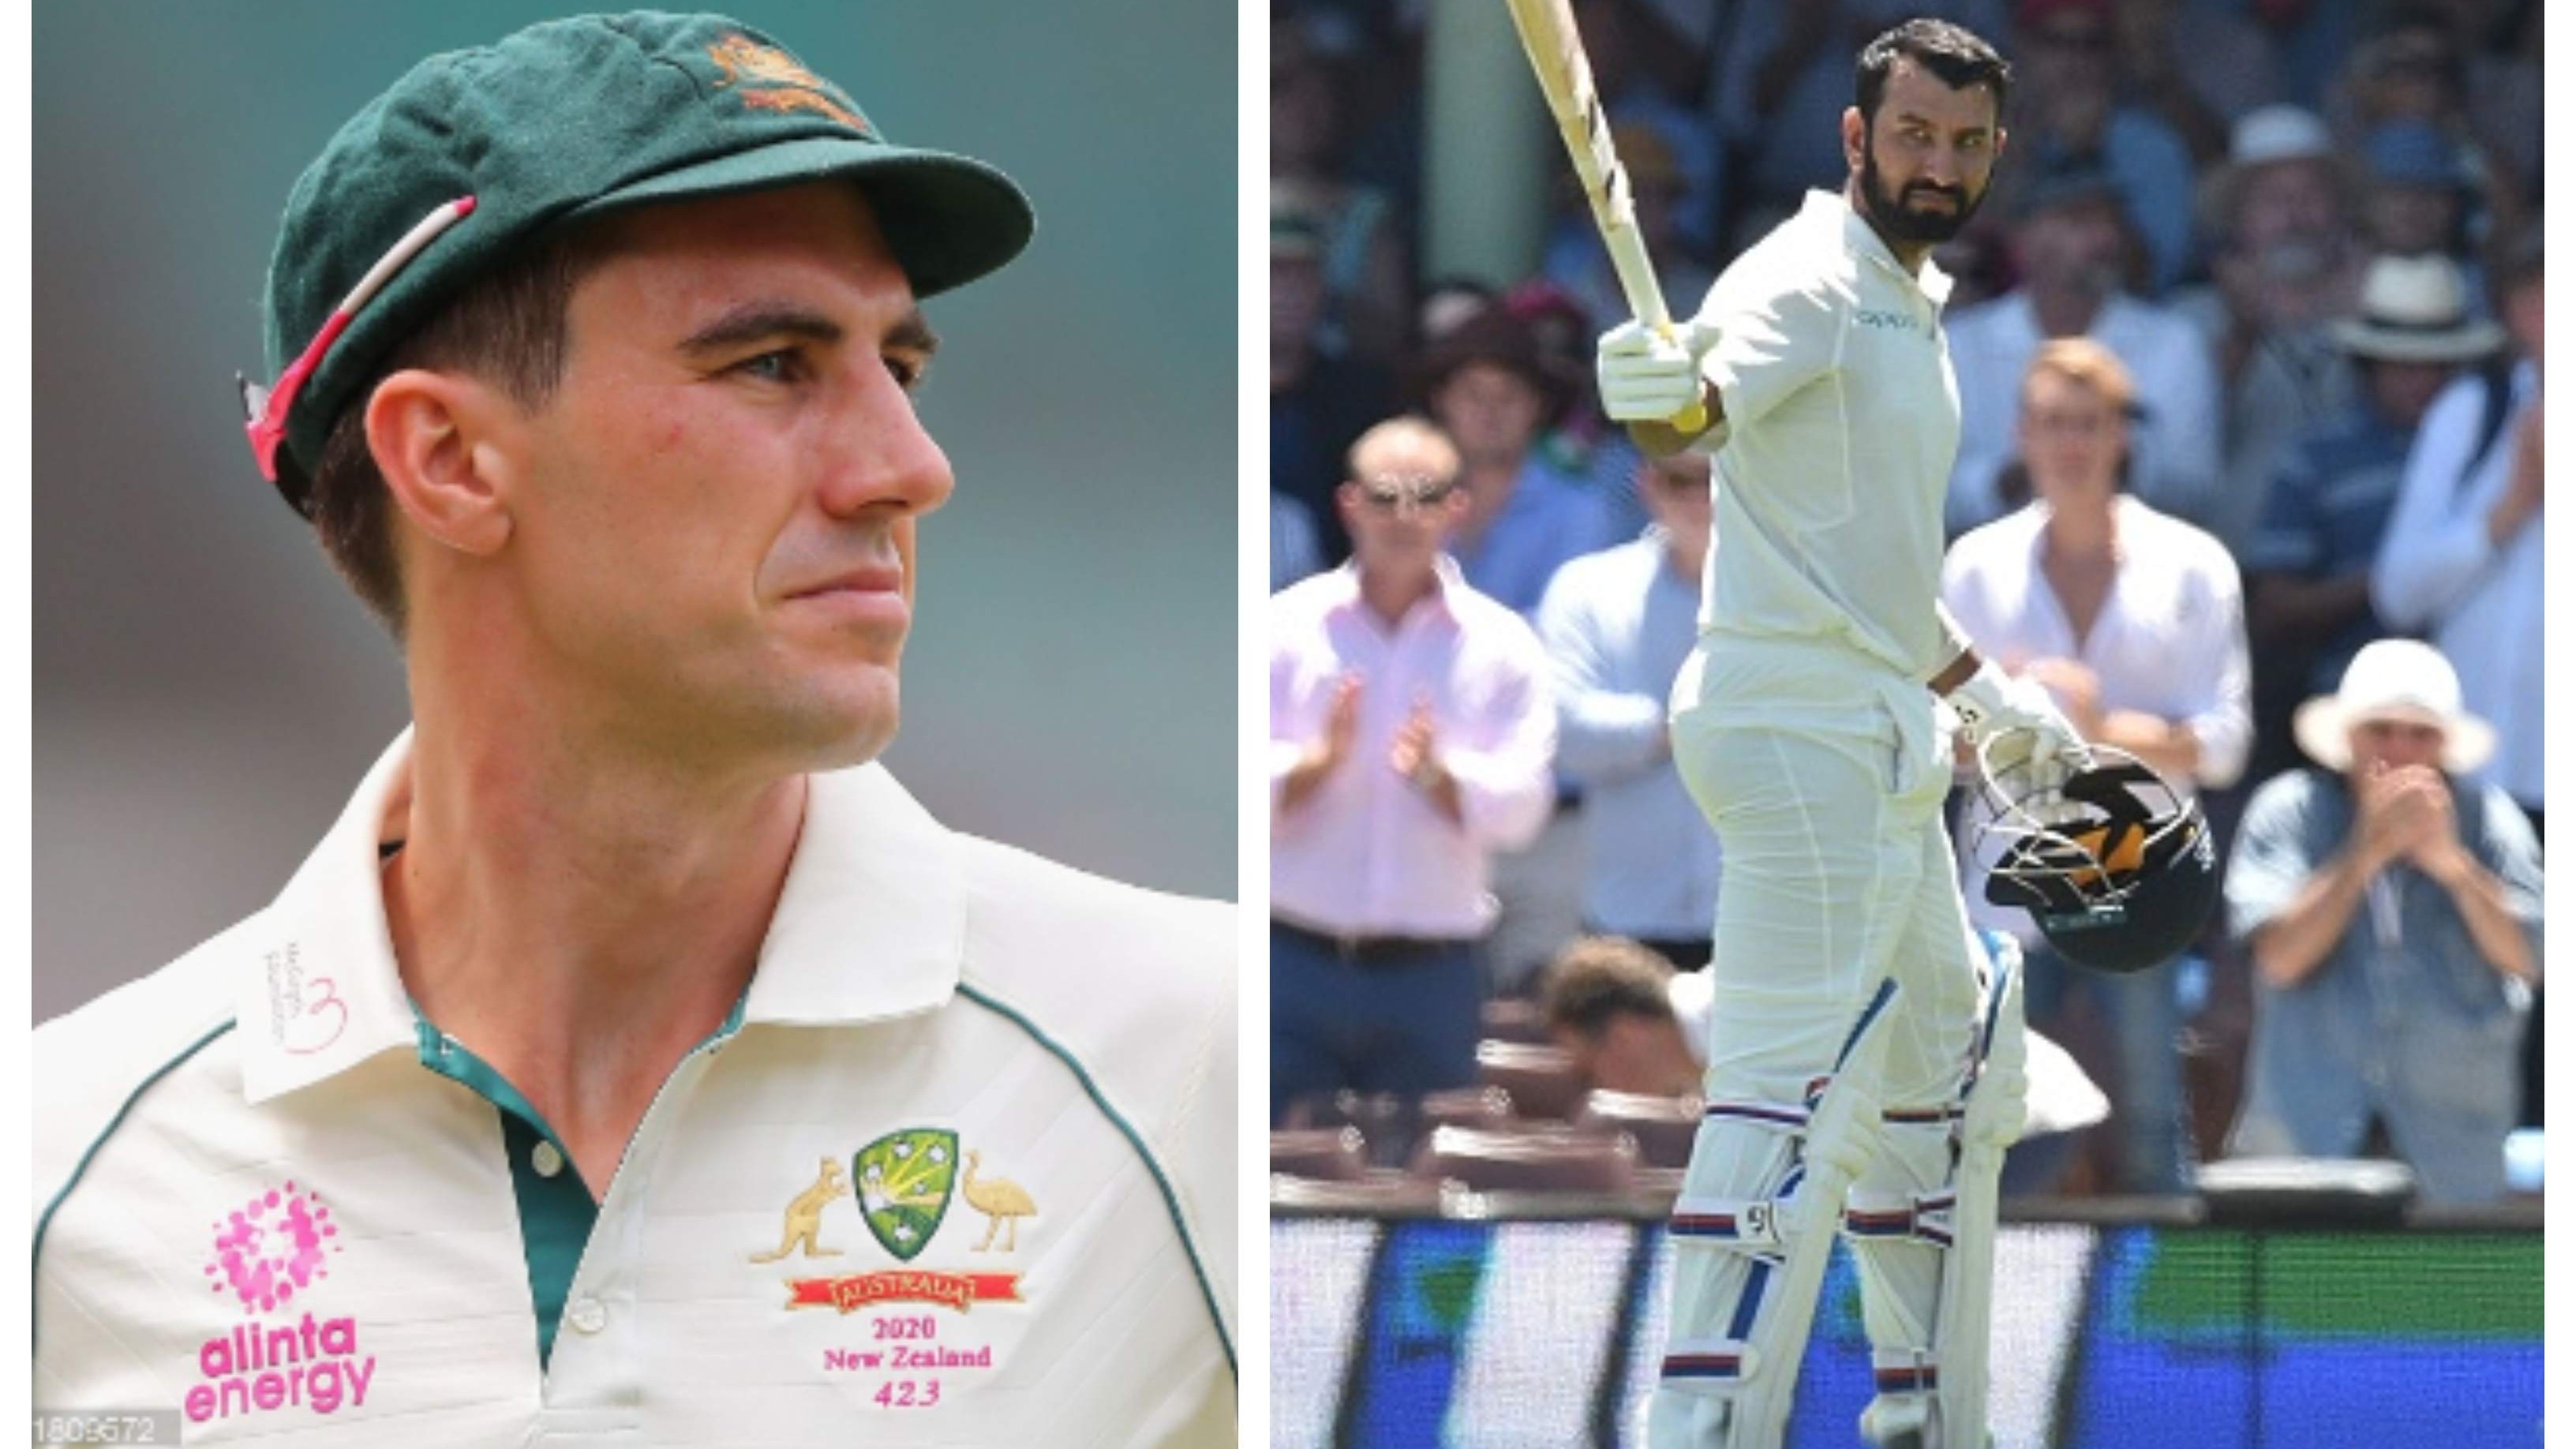 WATCH: “He was a real pain in the back for us,” Cummins recalls Pujara’s exploits down under